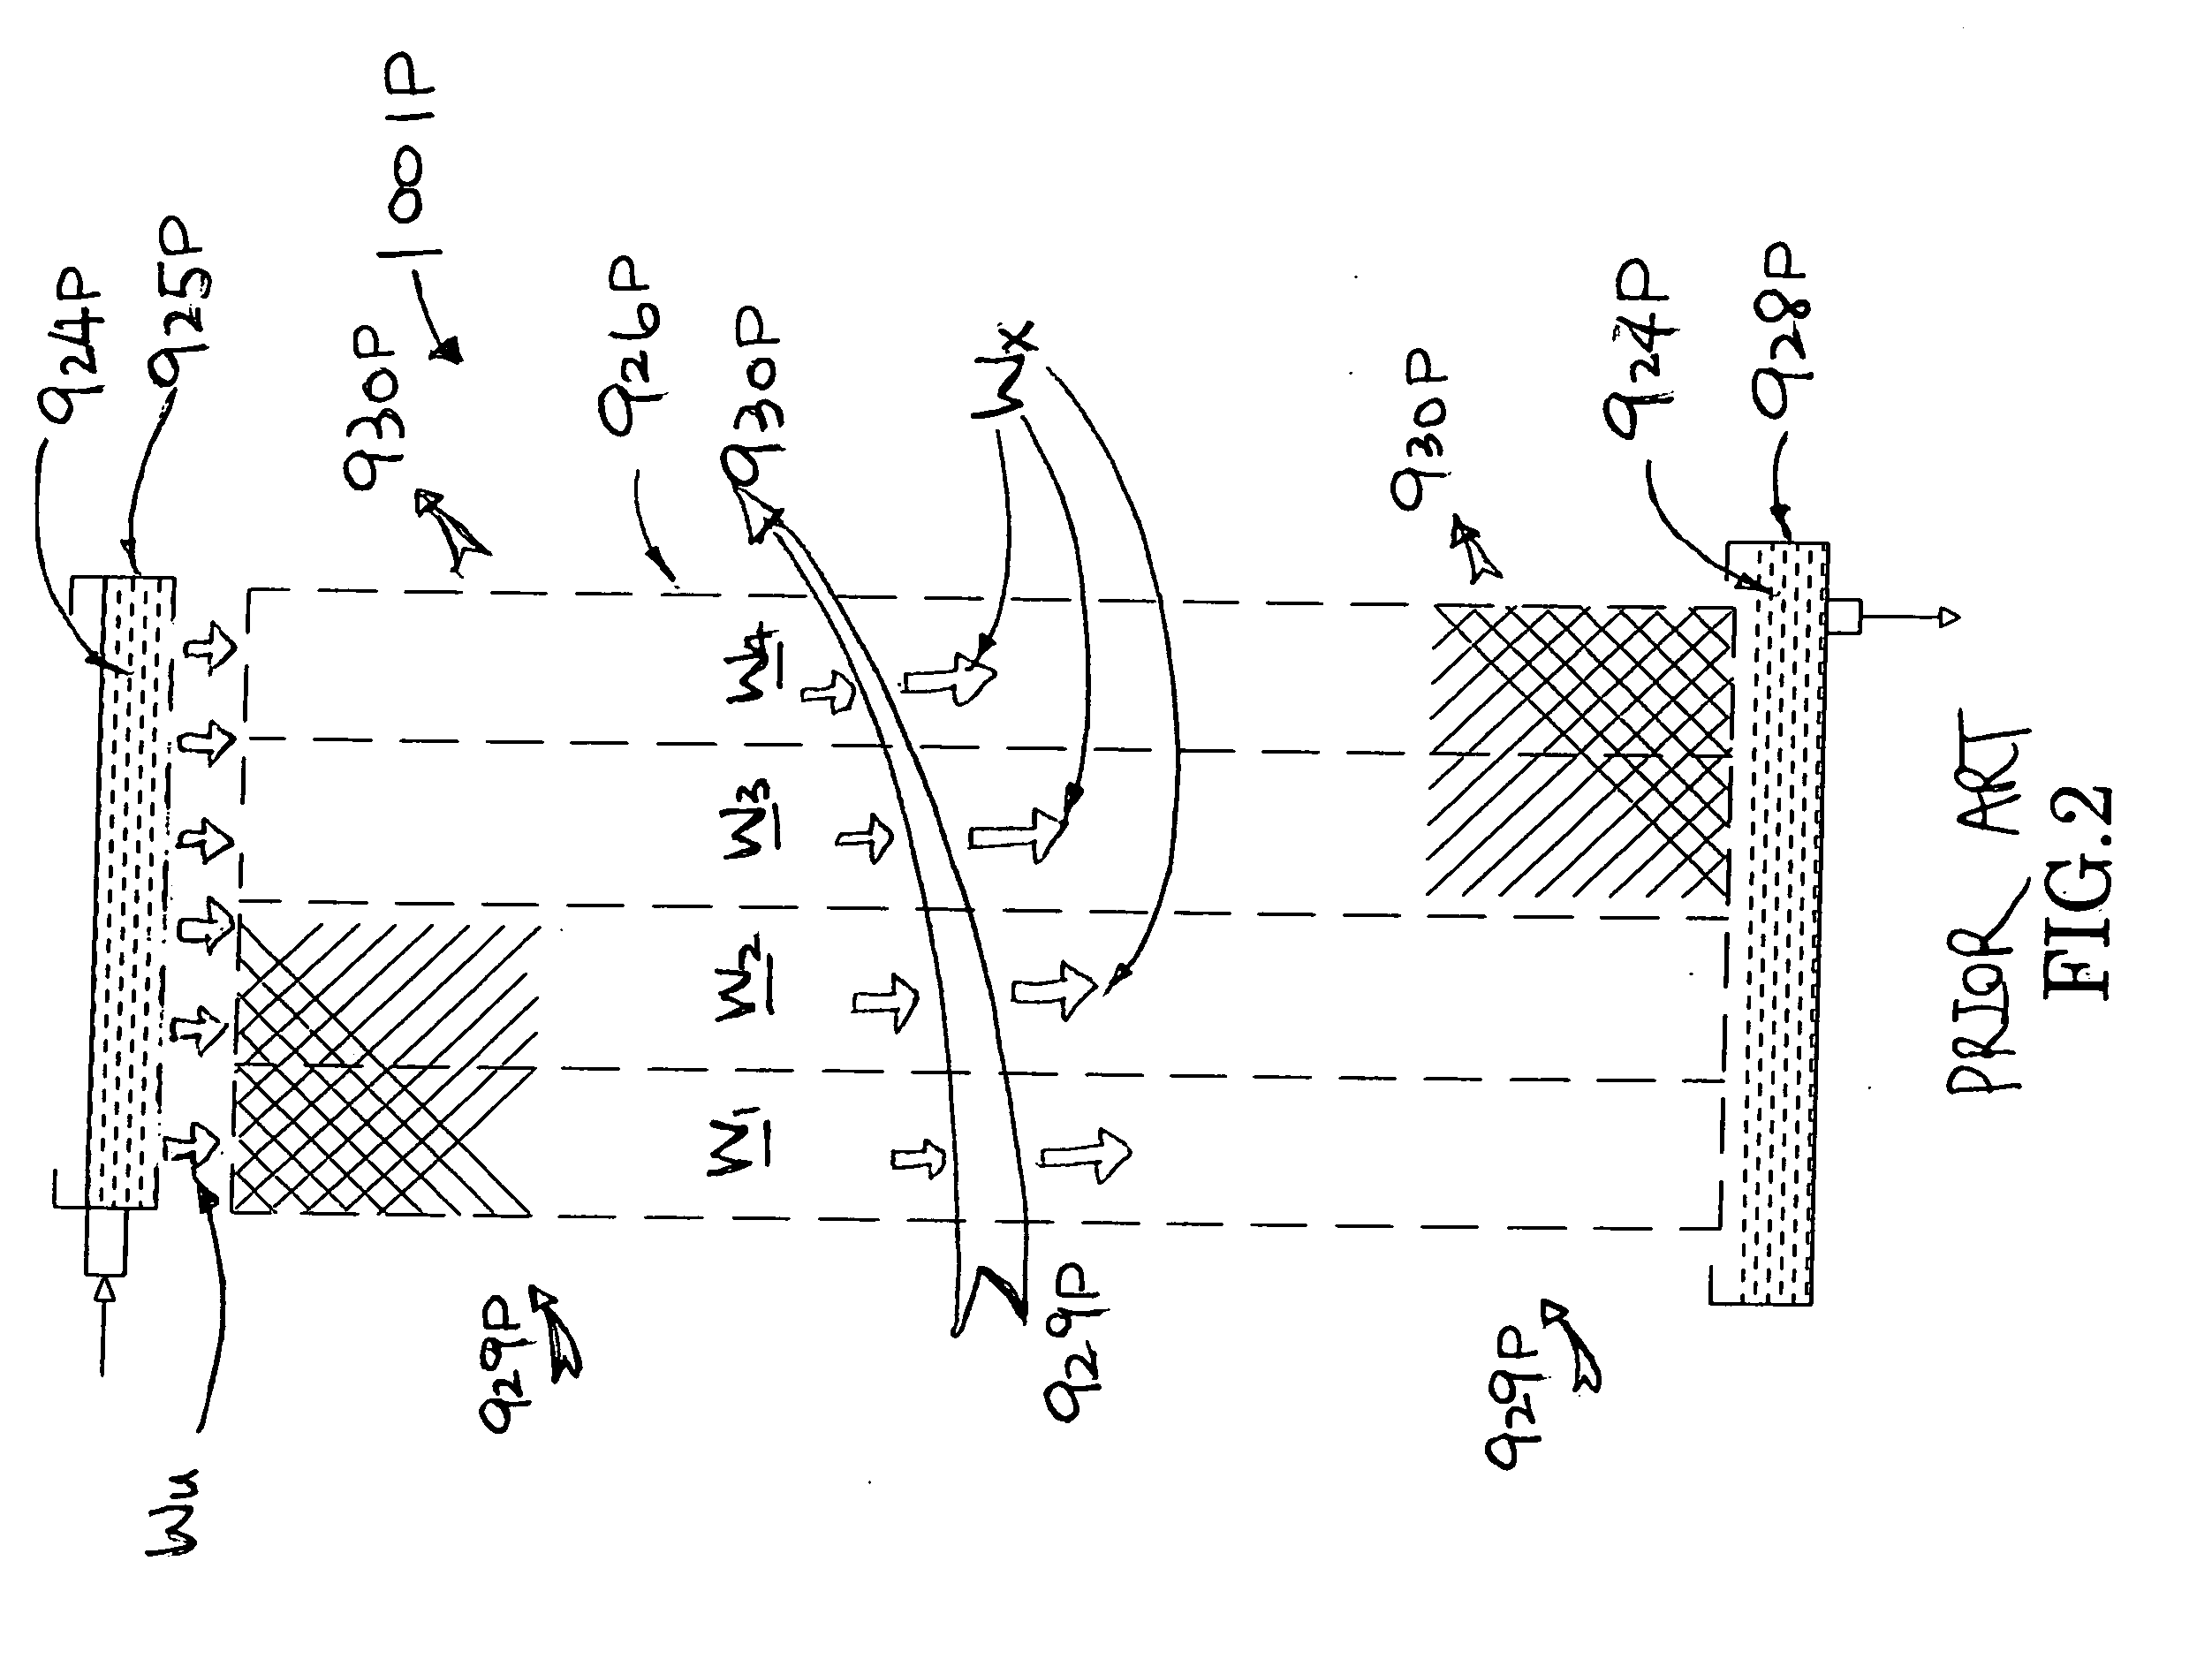 Air conditioning system with multiple-effect evaporative condenser